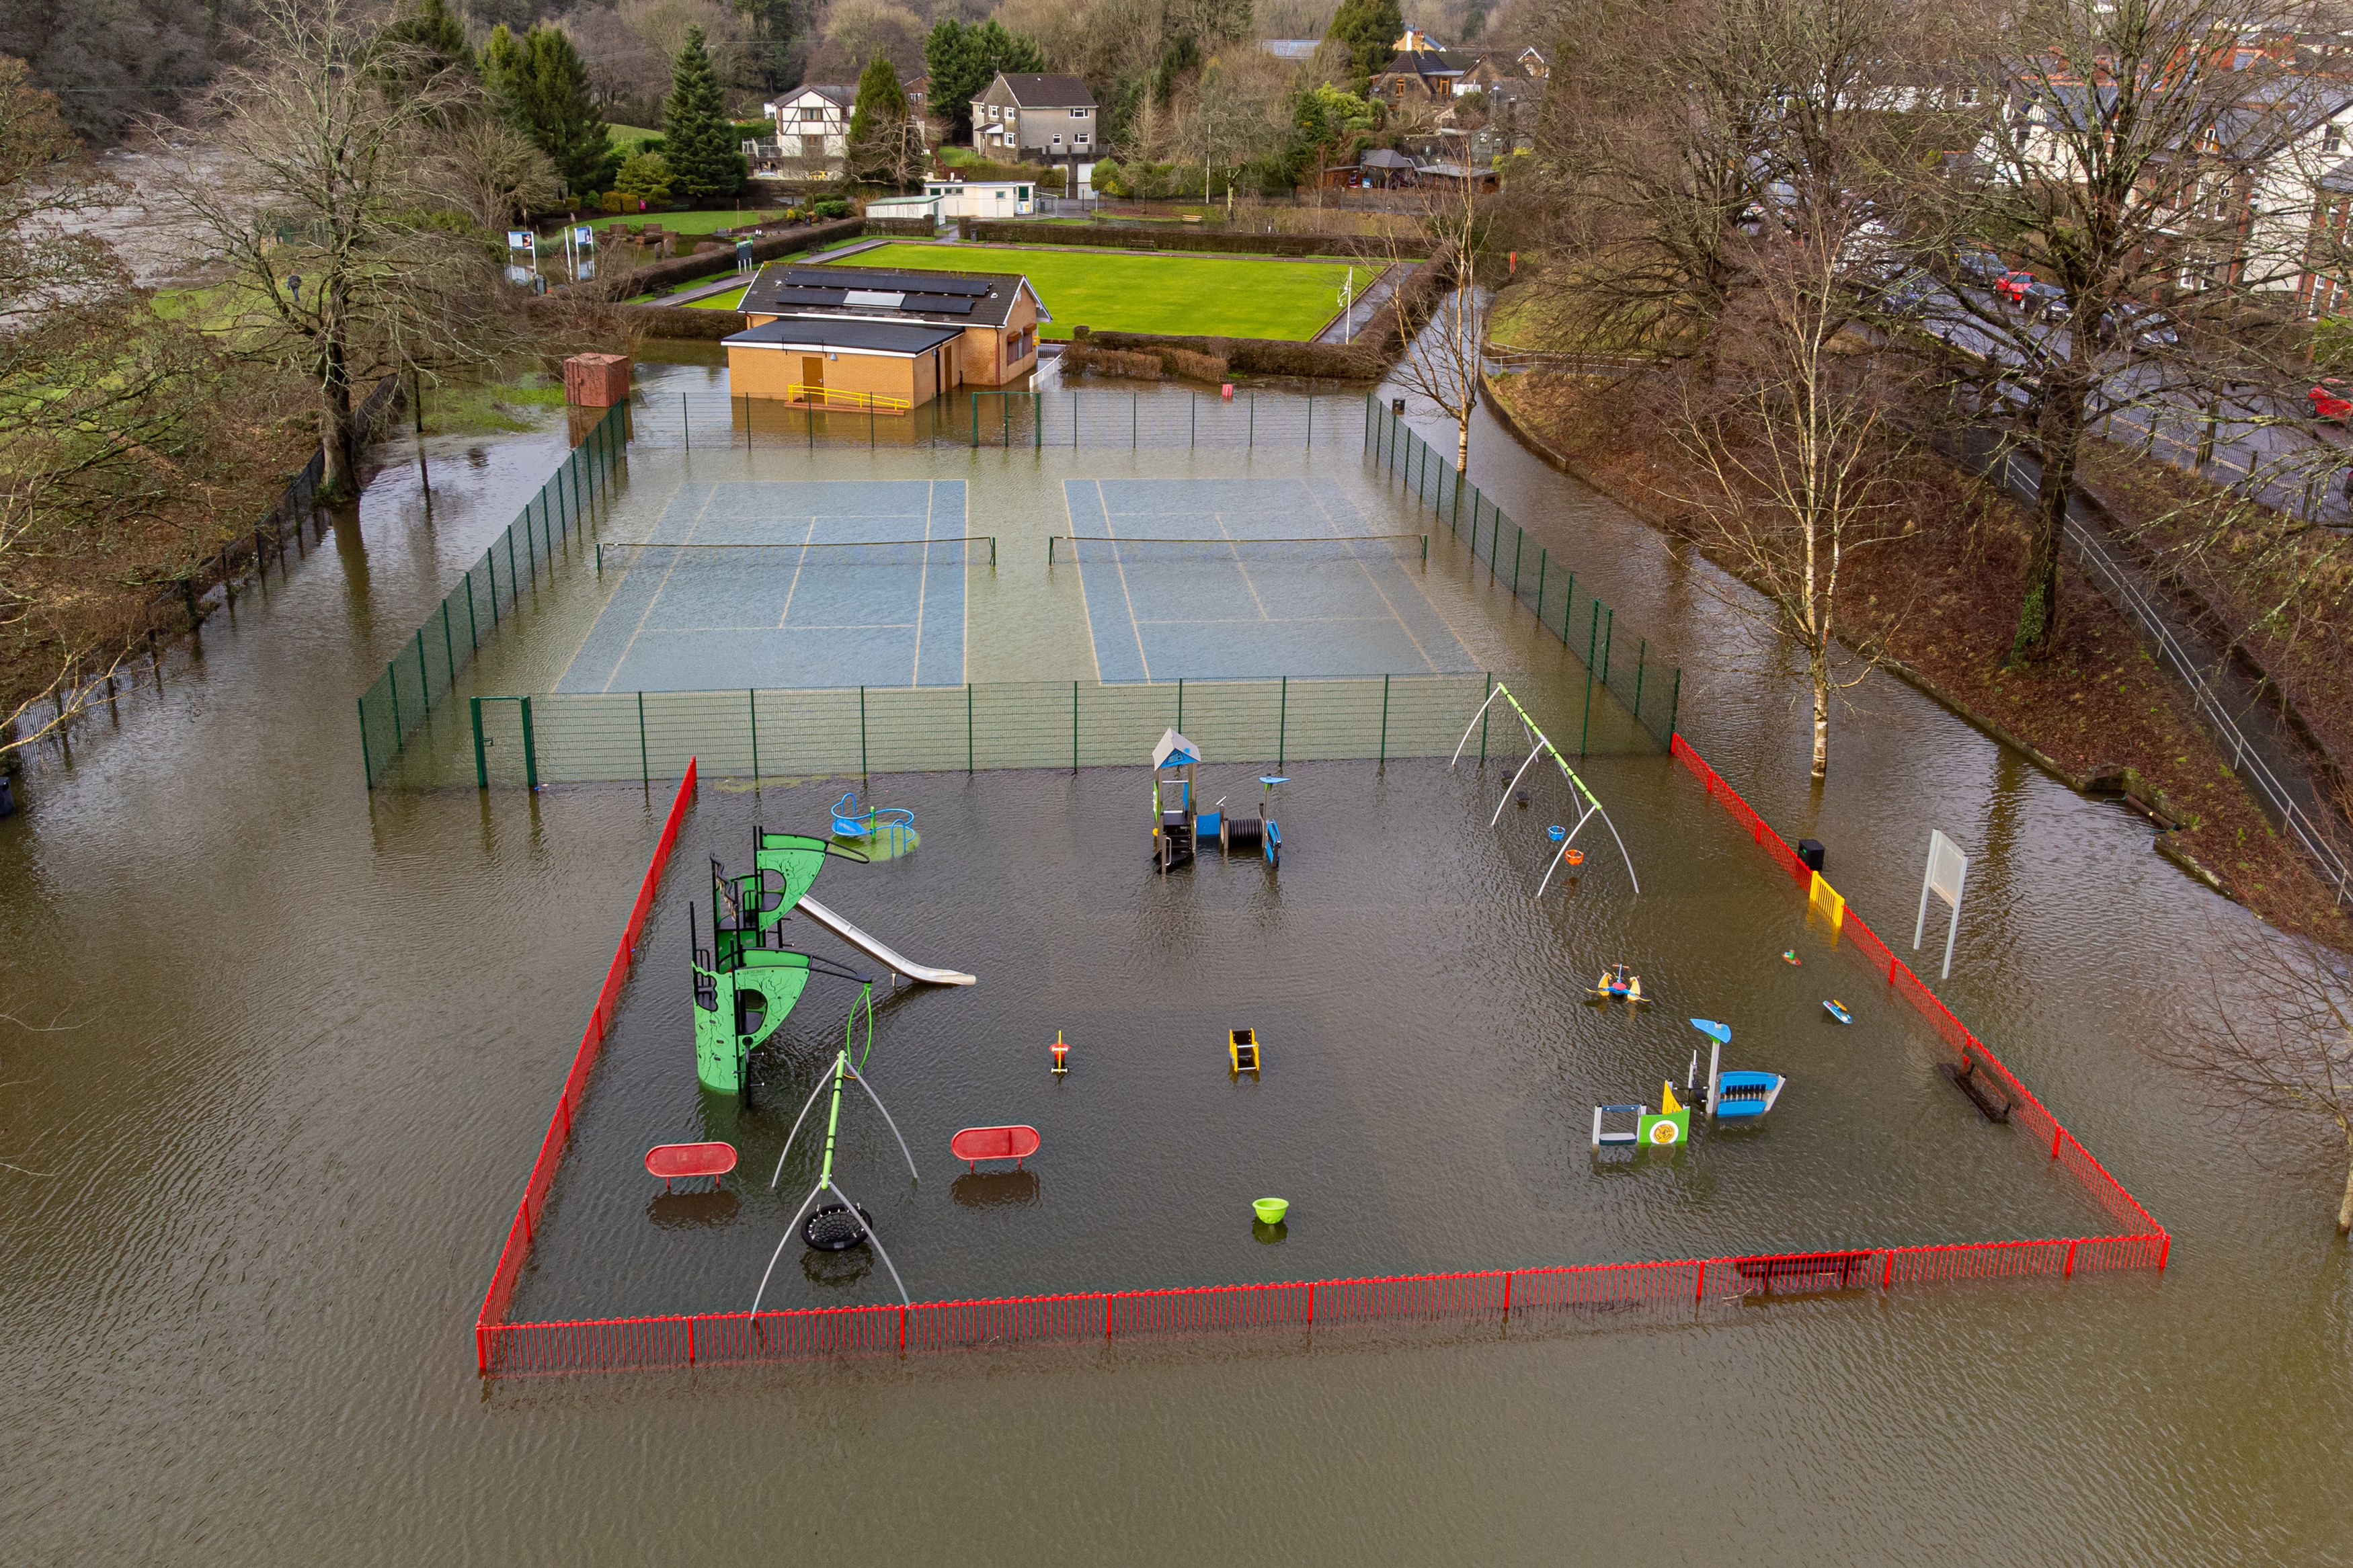 Flooding next to the River Taff has submerged the play park in Taff's Well, Wales